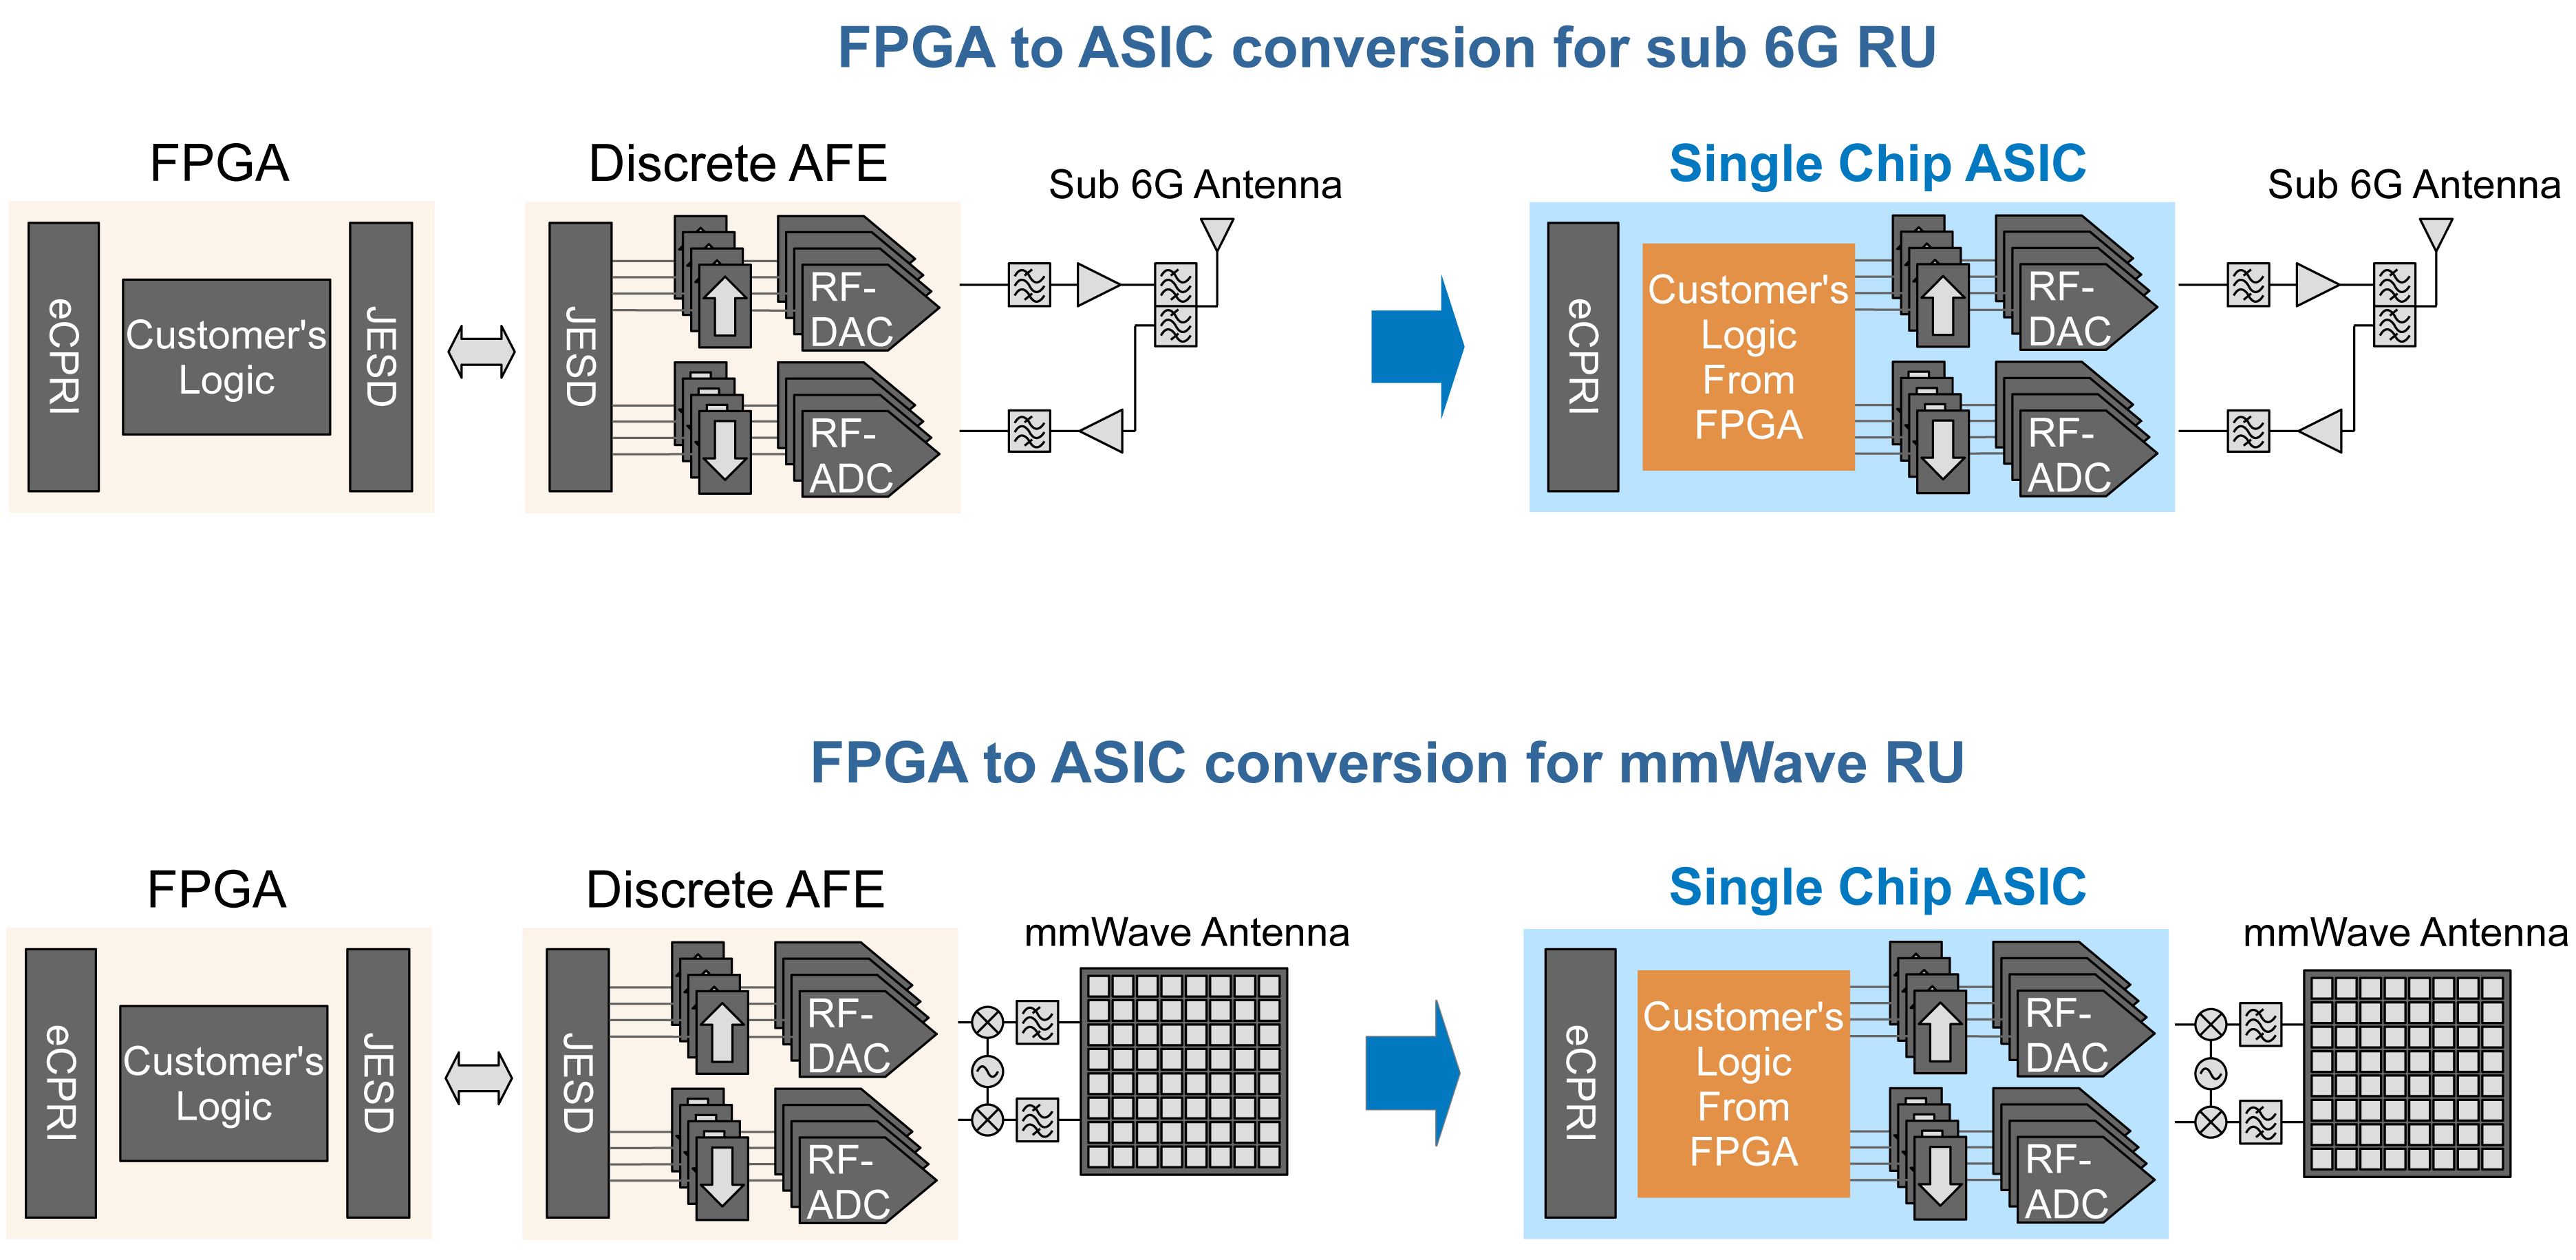 FPGA to ASIC conversion for sub 6G RU and mmWave RU